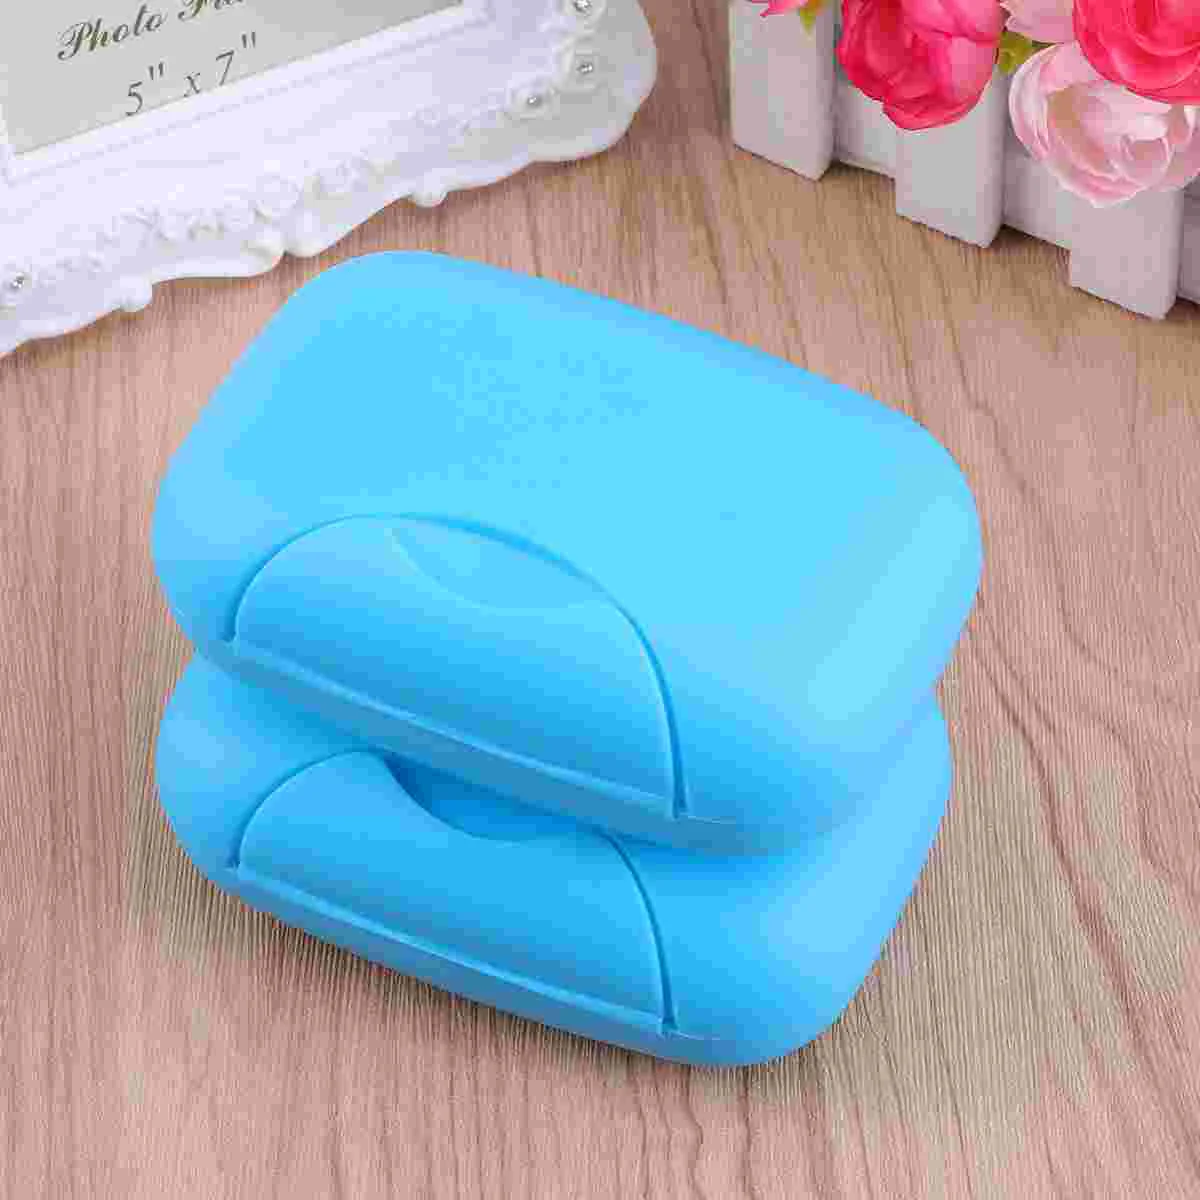 

Creative Portable Soap Dish Box Soap Holder Container Traveling Sealed Soap Case Size L (Blue) Dishes the bathroom